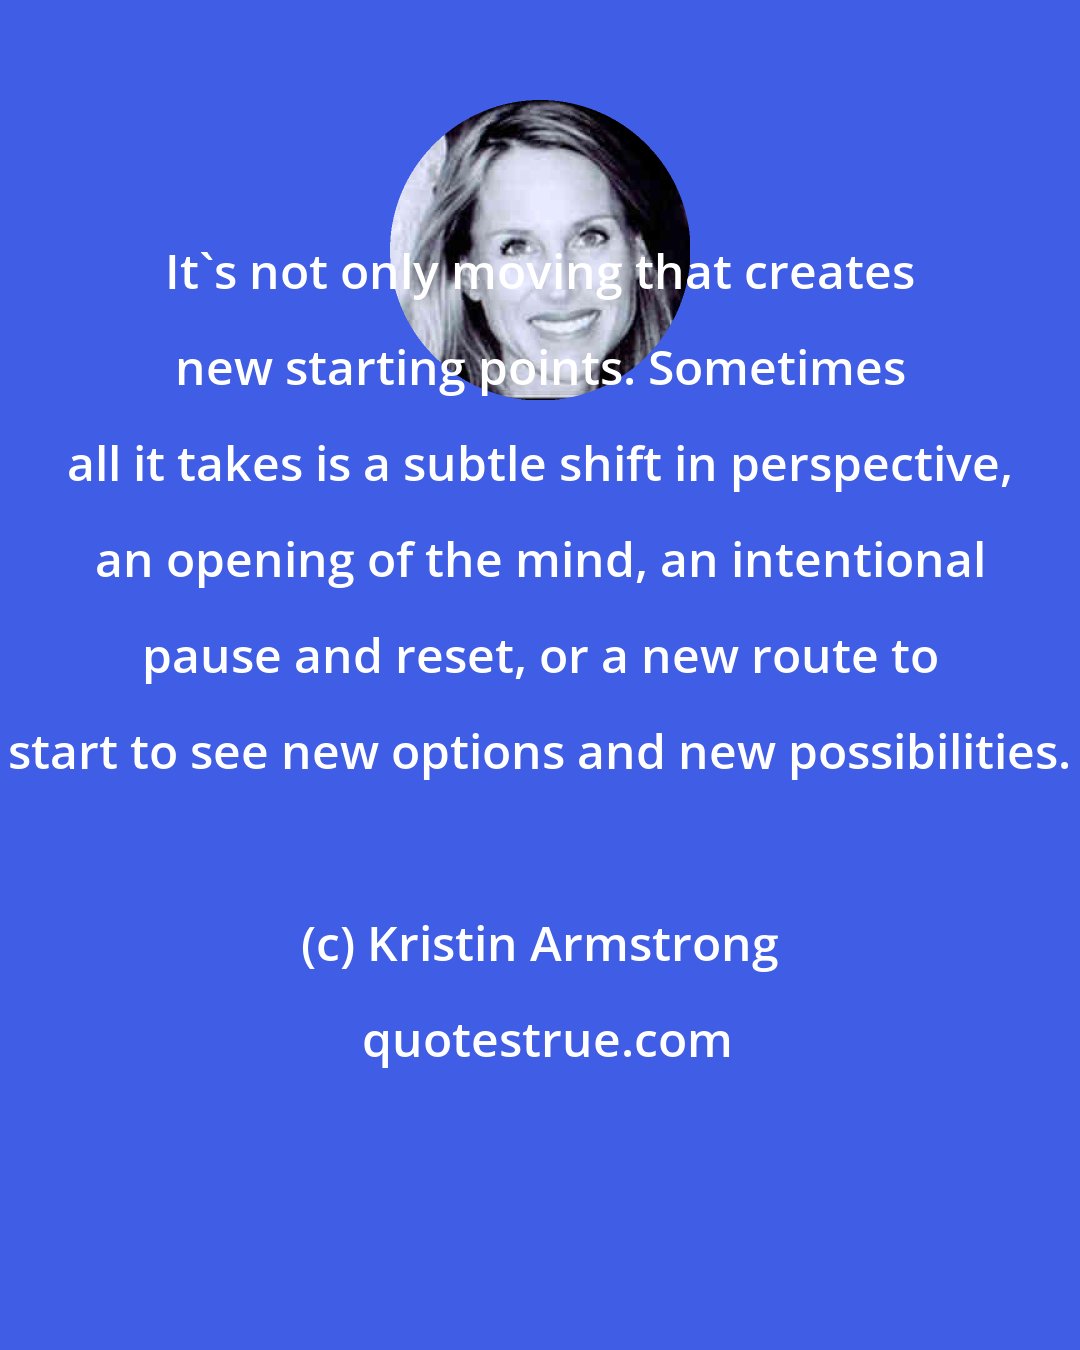 Kristin Armstrong: It's not only moving that creates new starting points. Sometimes all it takes is a subtle shift in perspective, an opening of the mind, an intentional pause and reset, or a new route to start to see new options and new possibilities.